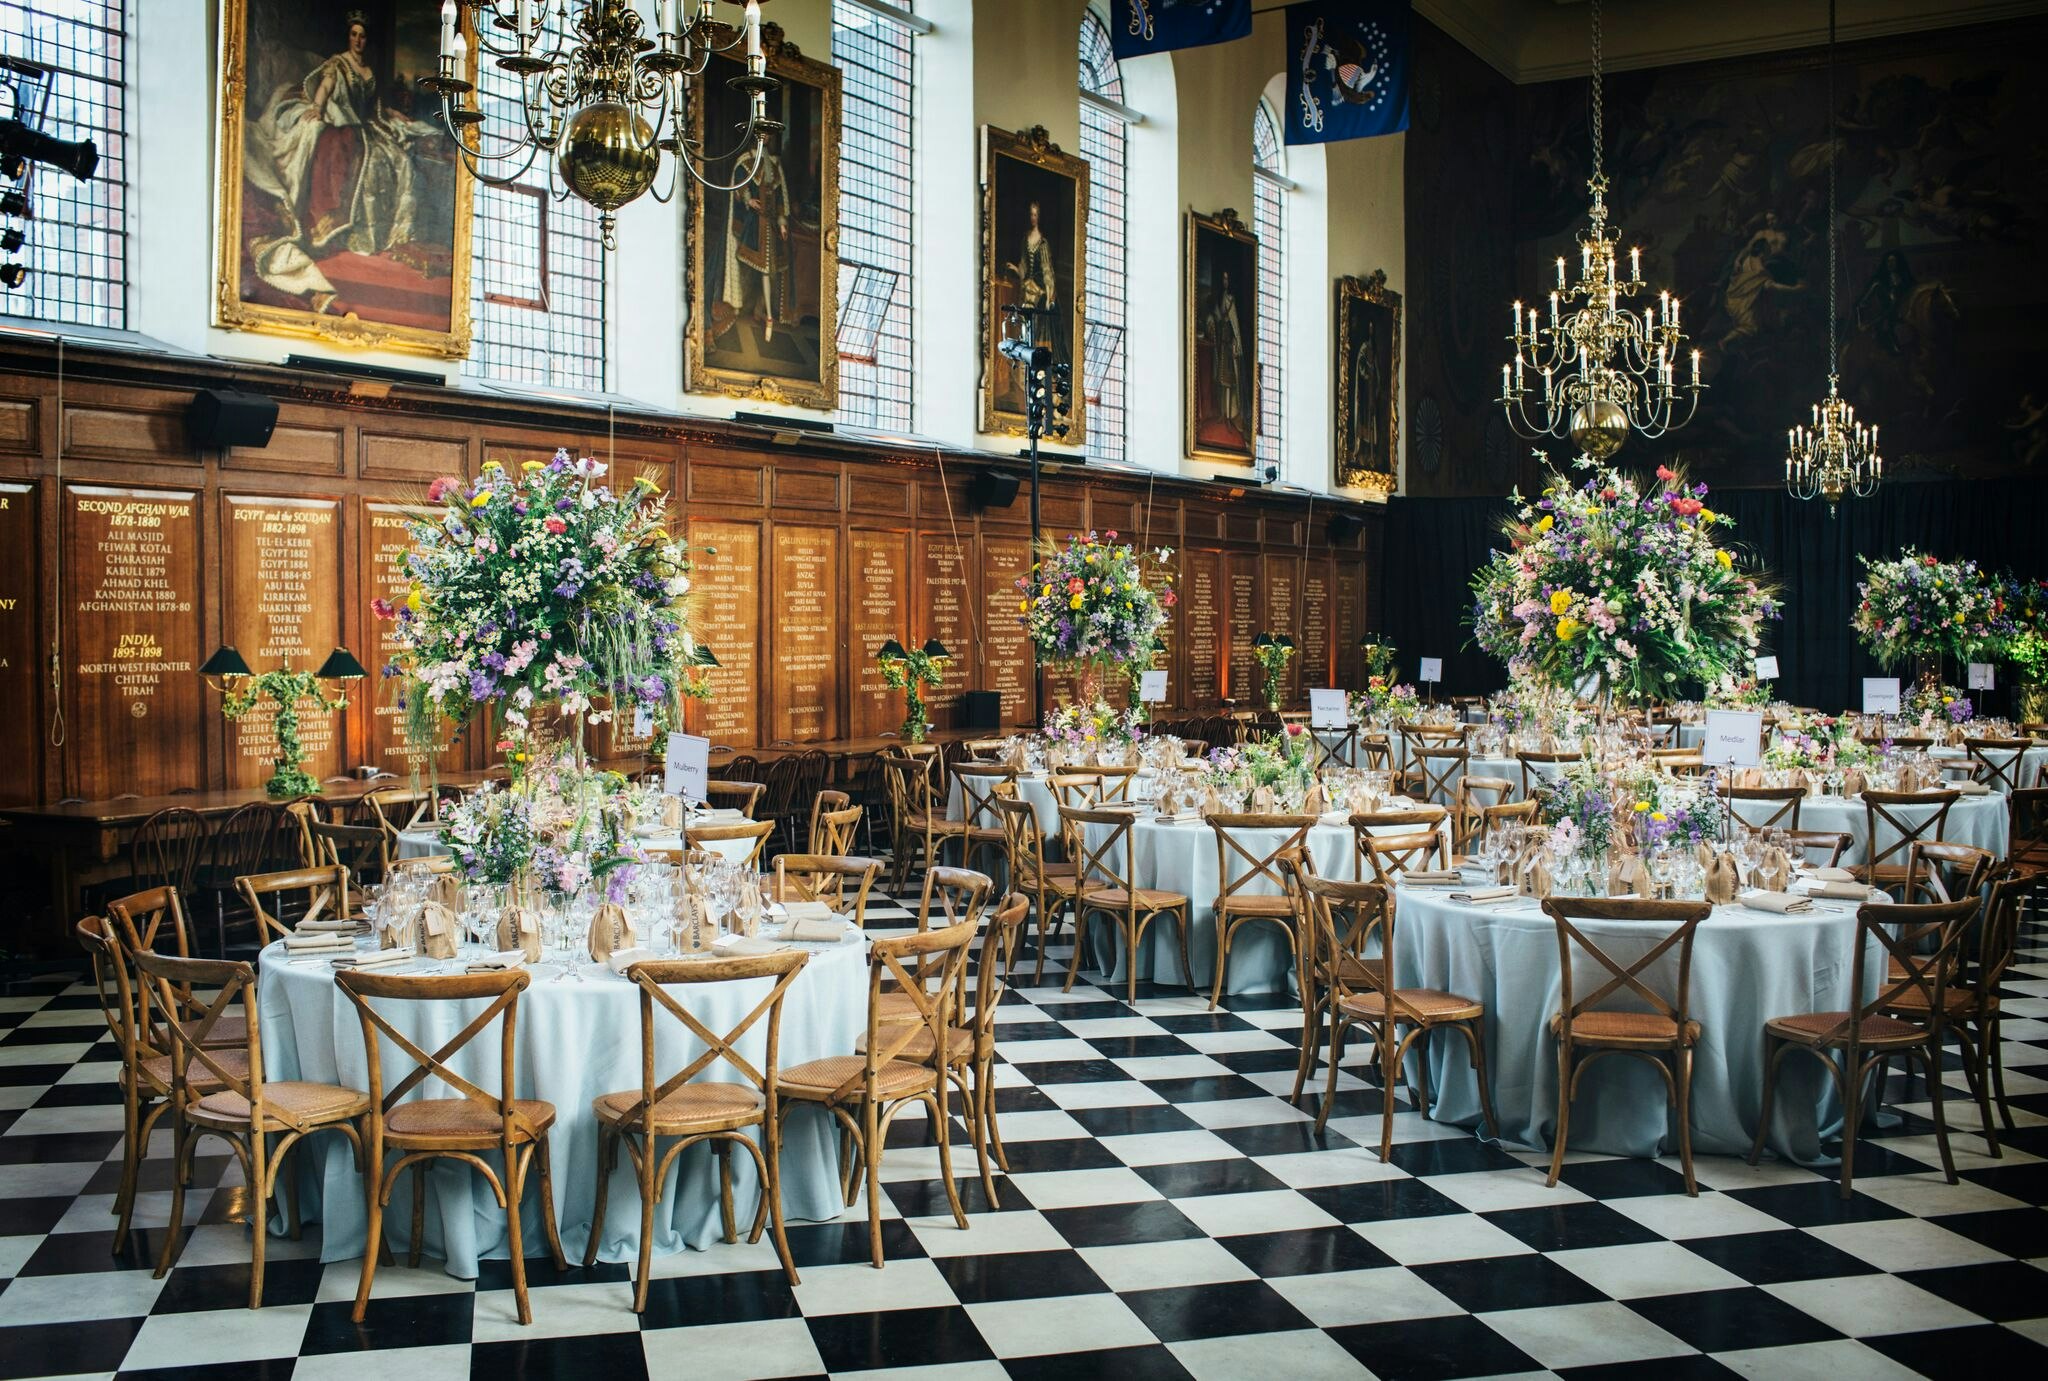 Royal Hospital Chelsea - The Great Hall image 1